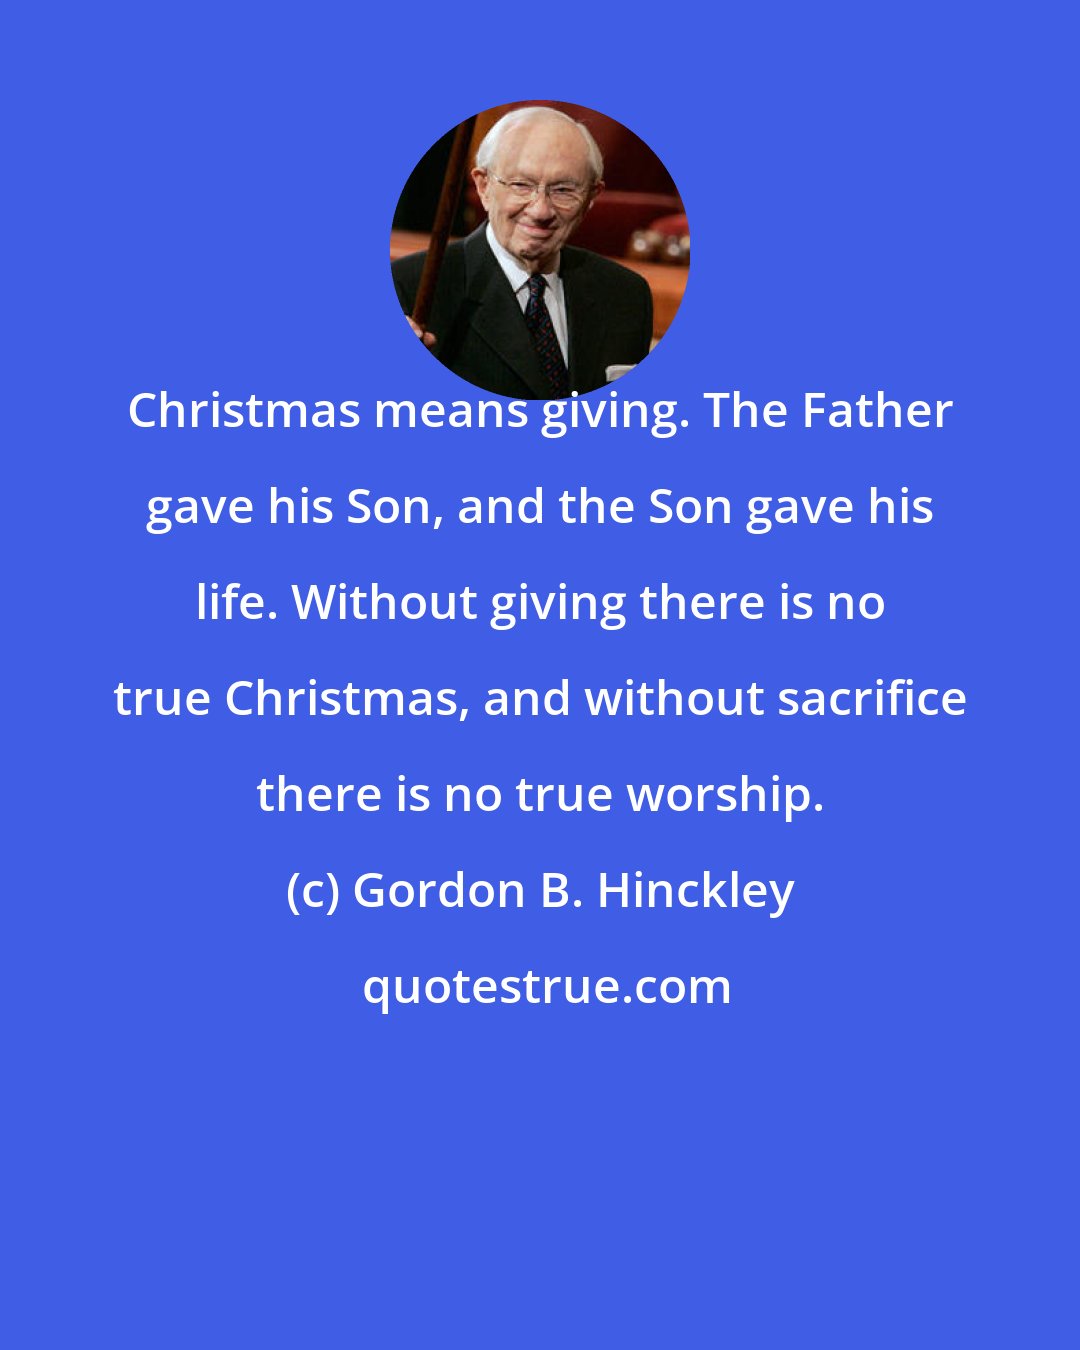 Gordon B. Hinckley: Christmas means giving. The Father gave his Son, and the Son gave his life. Without giving there is no true Christmas, and without sacrifice there is no true worship.